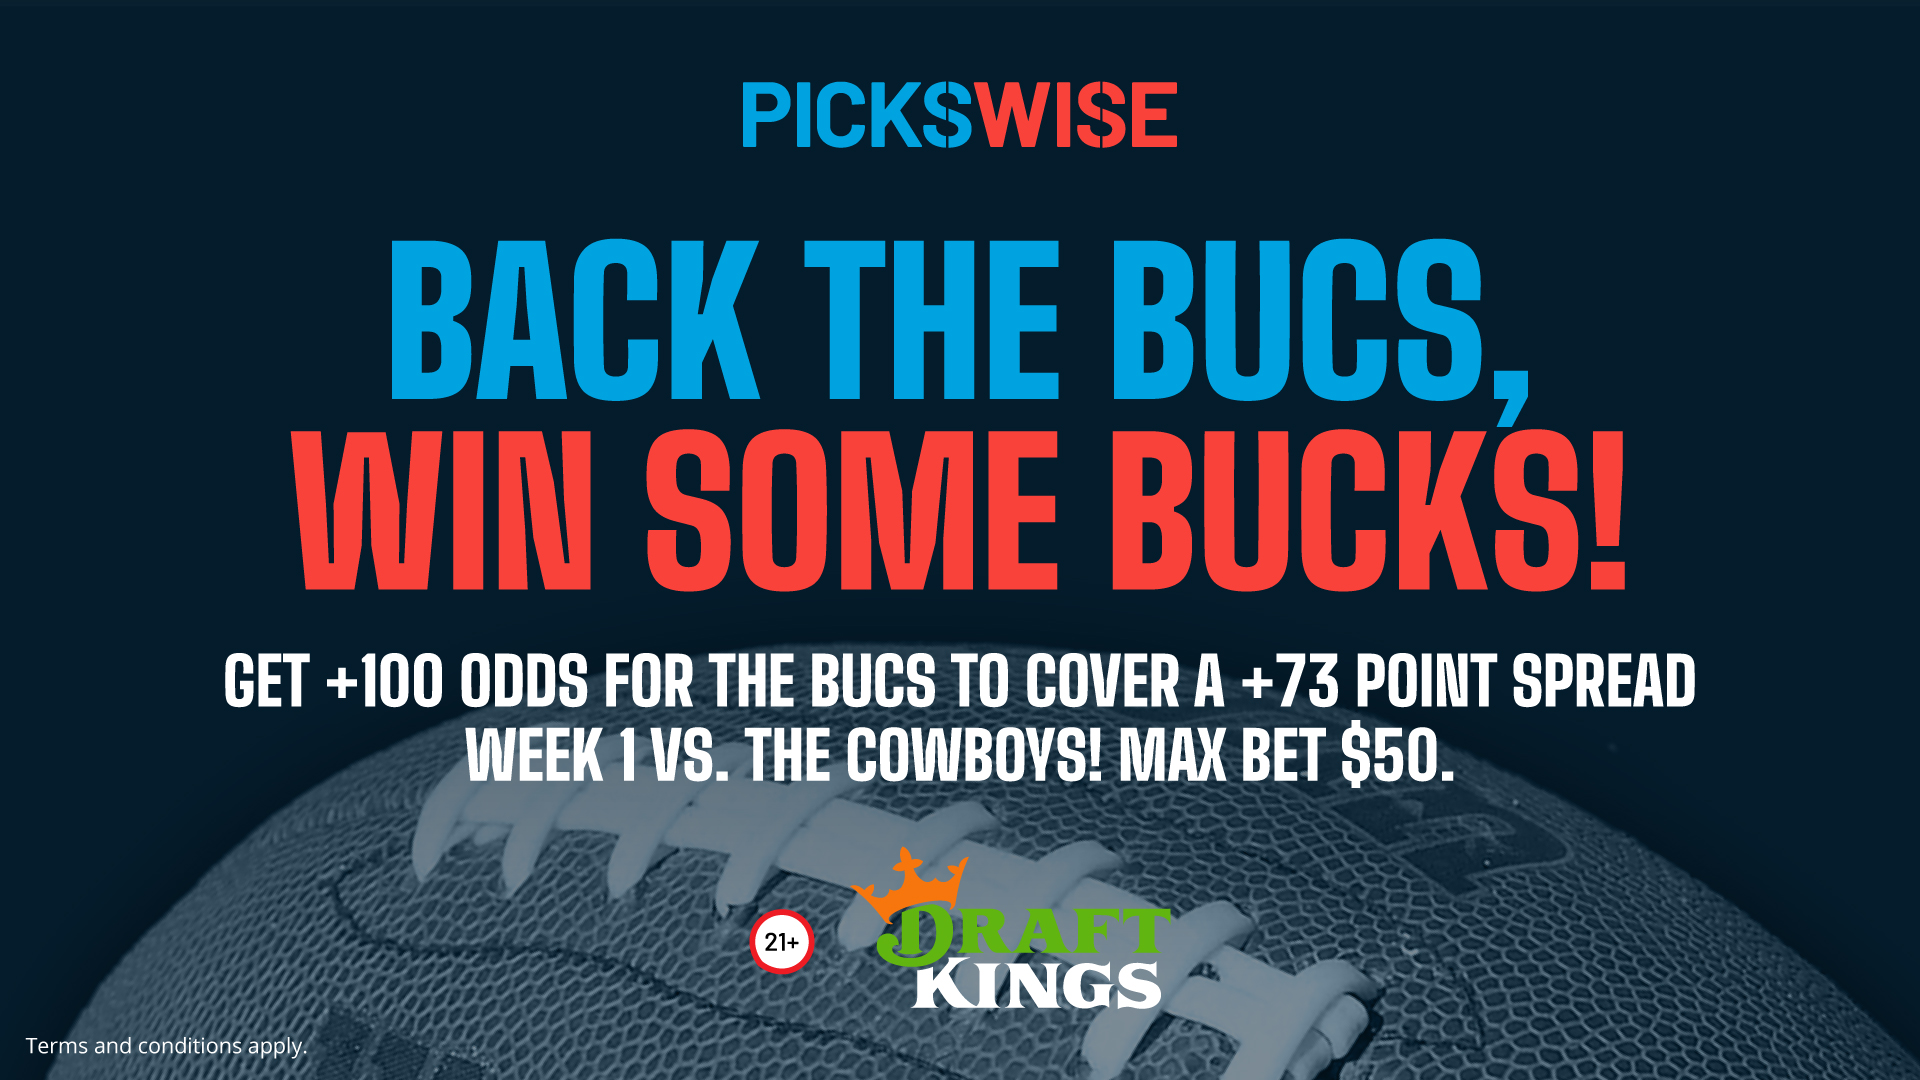 Double your money on the Buccaneers +73 with DraftKings Sportsbook!